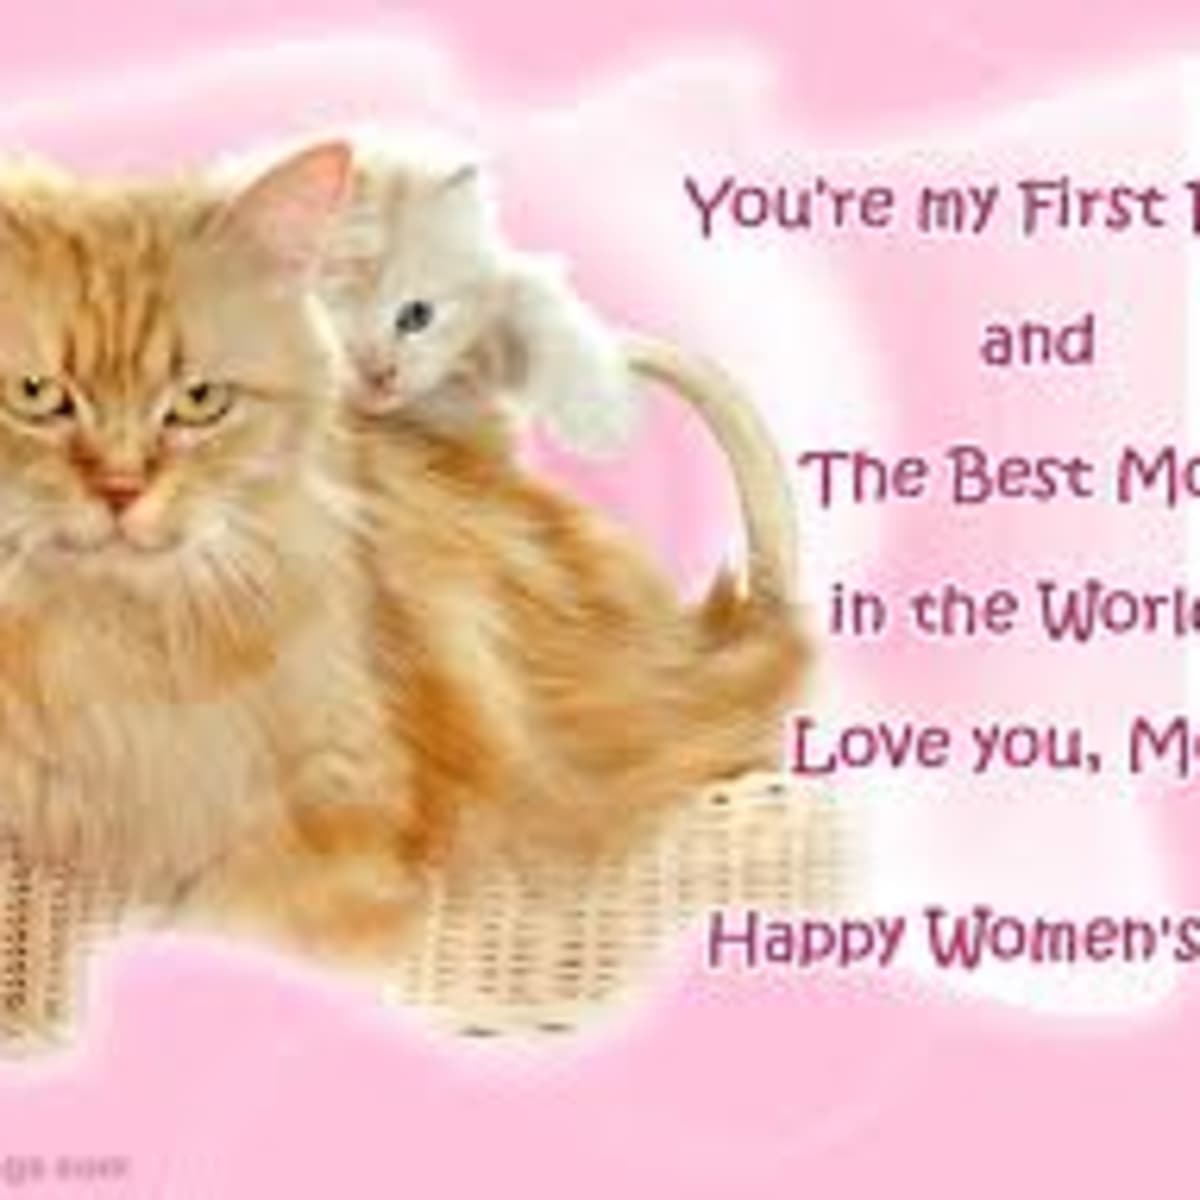 Happy Women's Day SMS Messages - HubPages